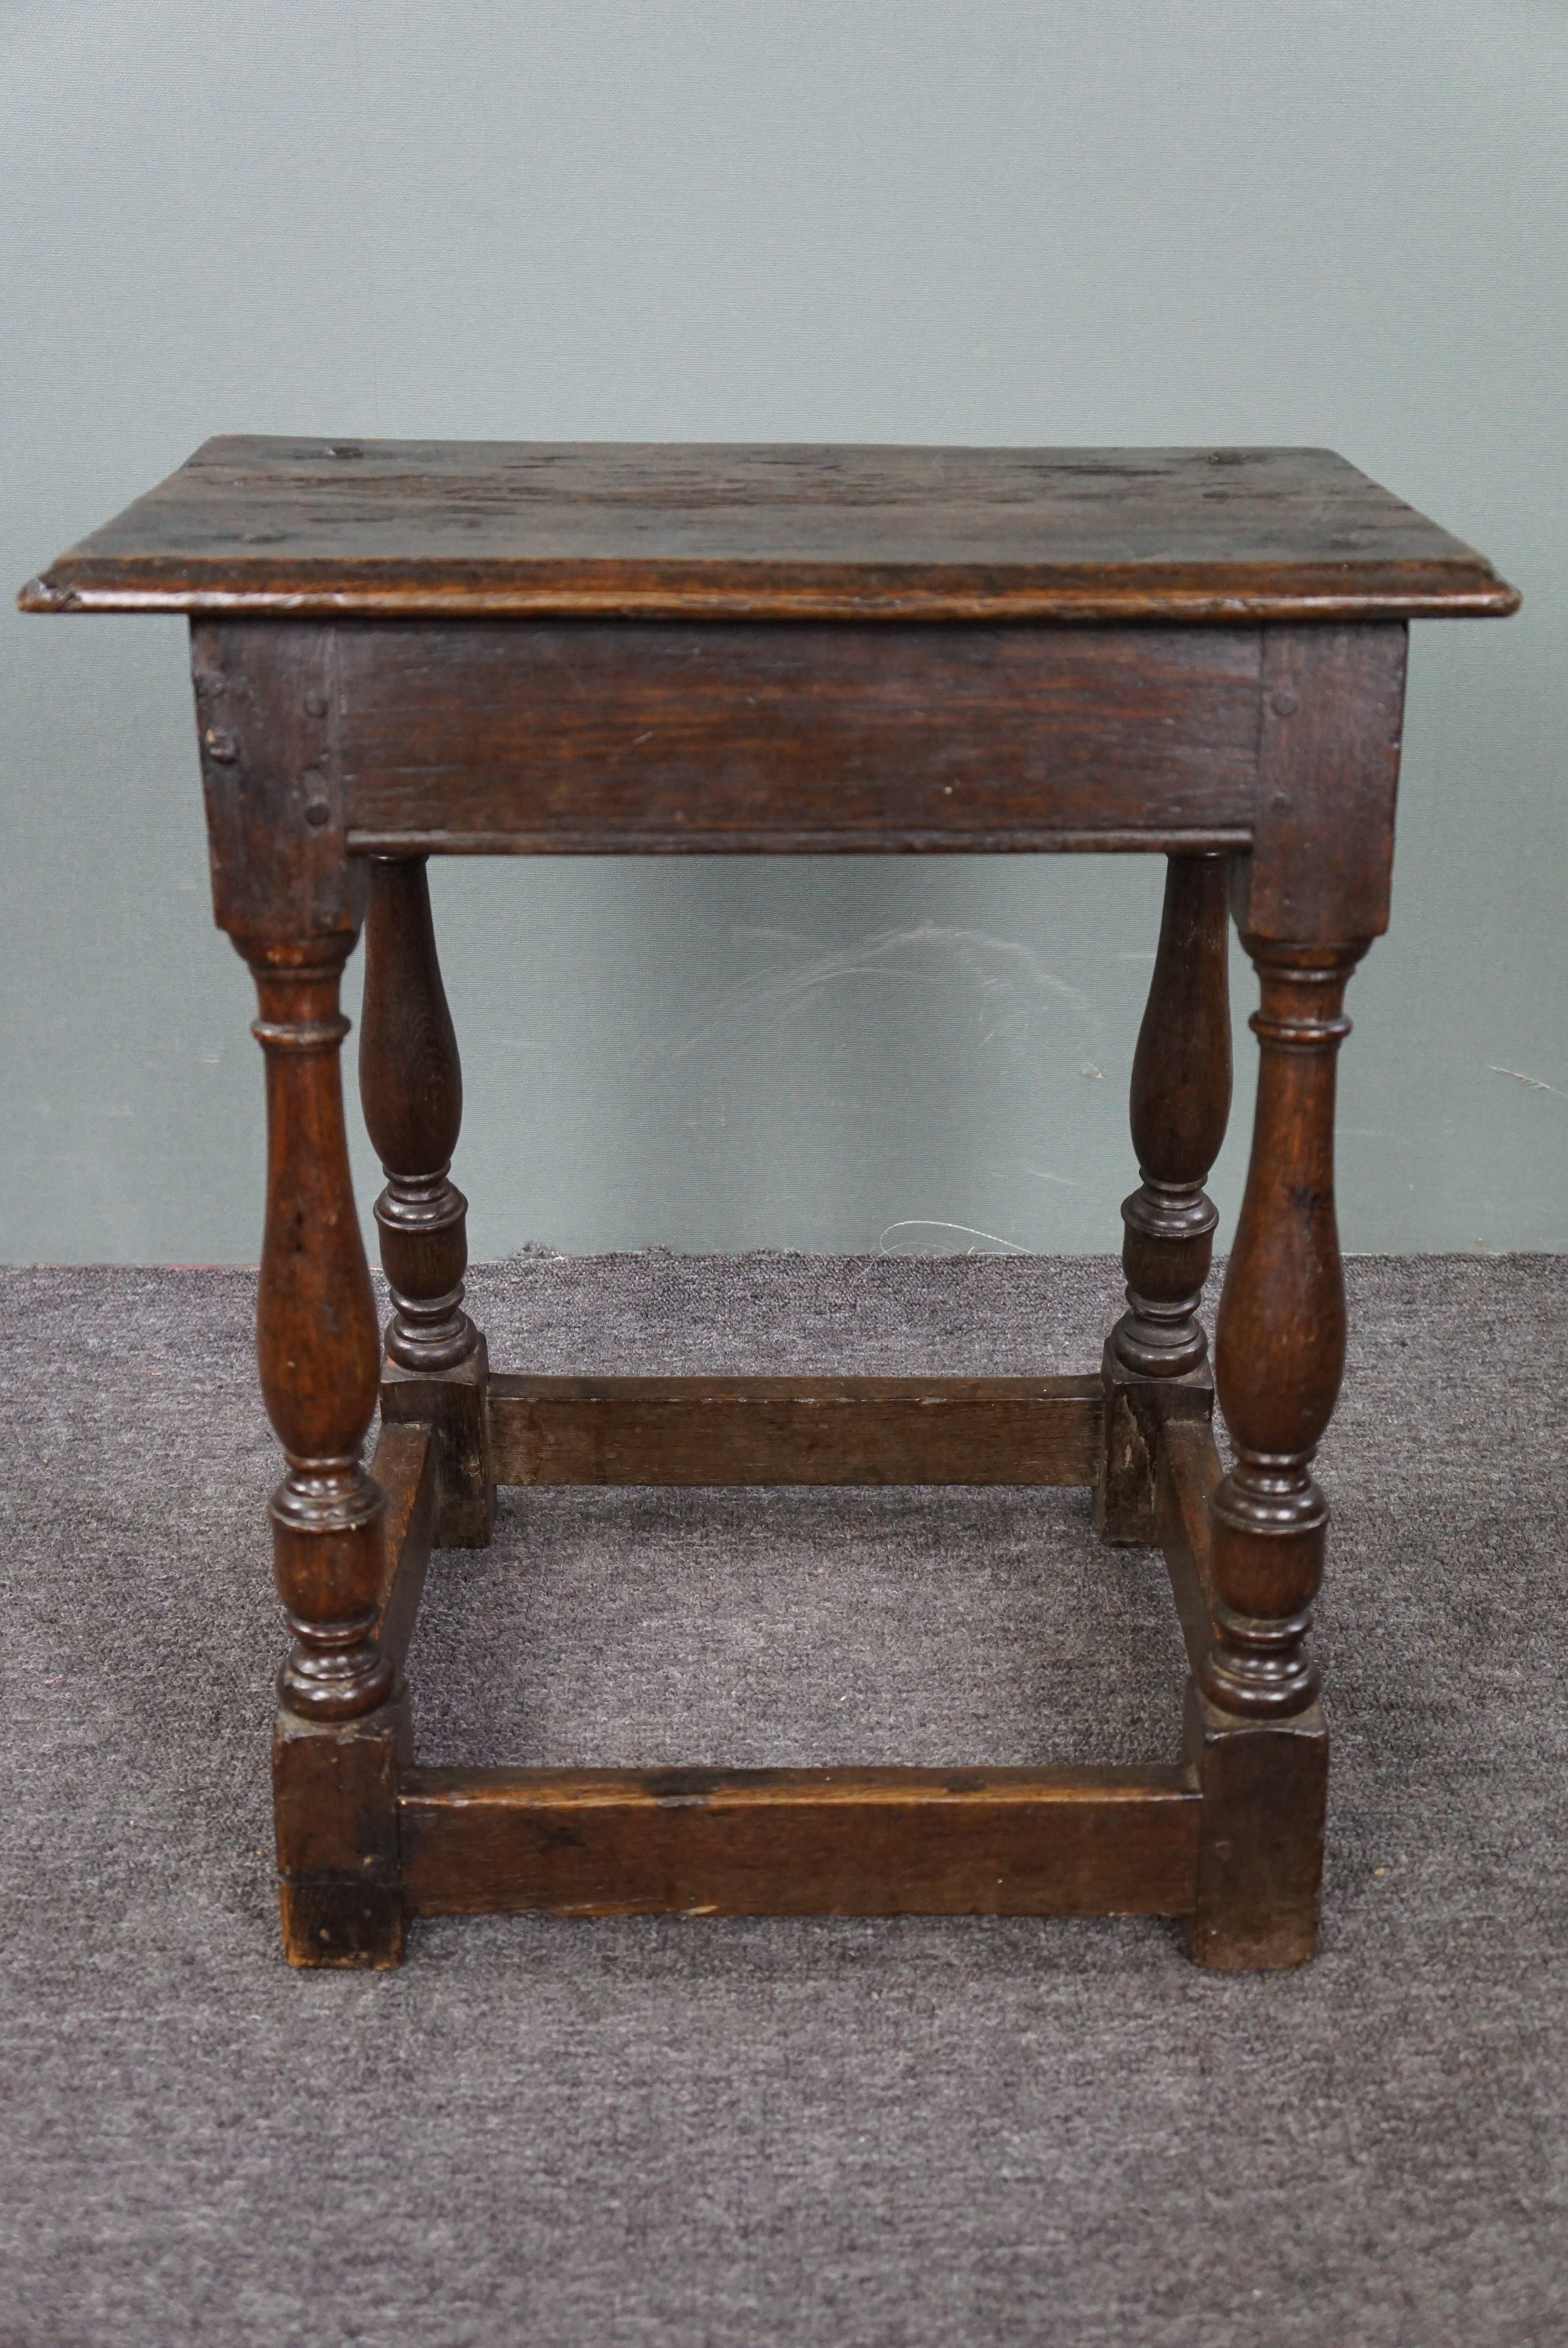 Offered is this exquisite and notably original English 16th-century oak joint stool. This very beautiful and notably original 16th-century joint stool is in good and fully functional condition. From the wood to the hand-forged nails, this is a true